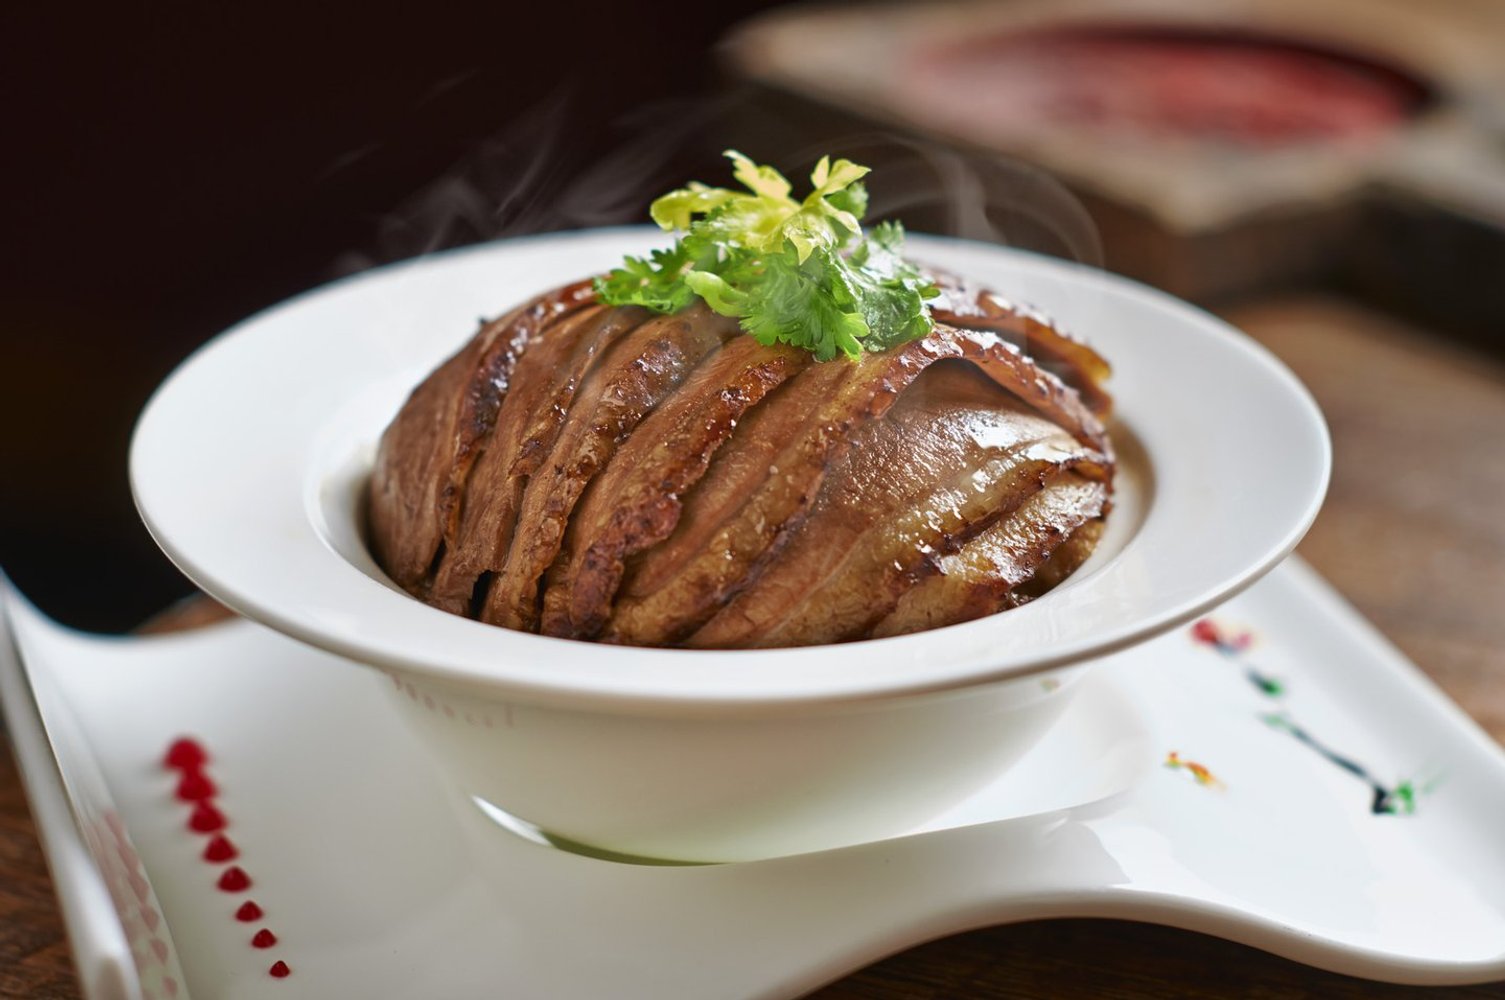 Swatow City Restaurant's Teochew Braised Sliced Duck, delivered islandwide in Singapore powered by Oddle.